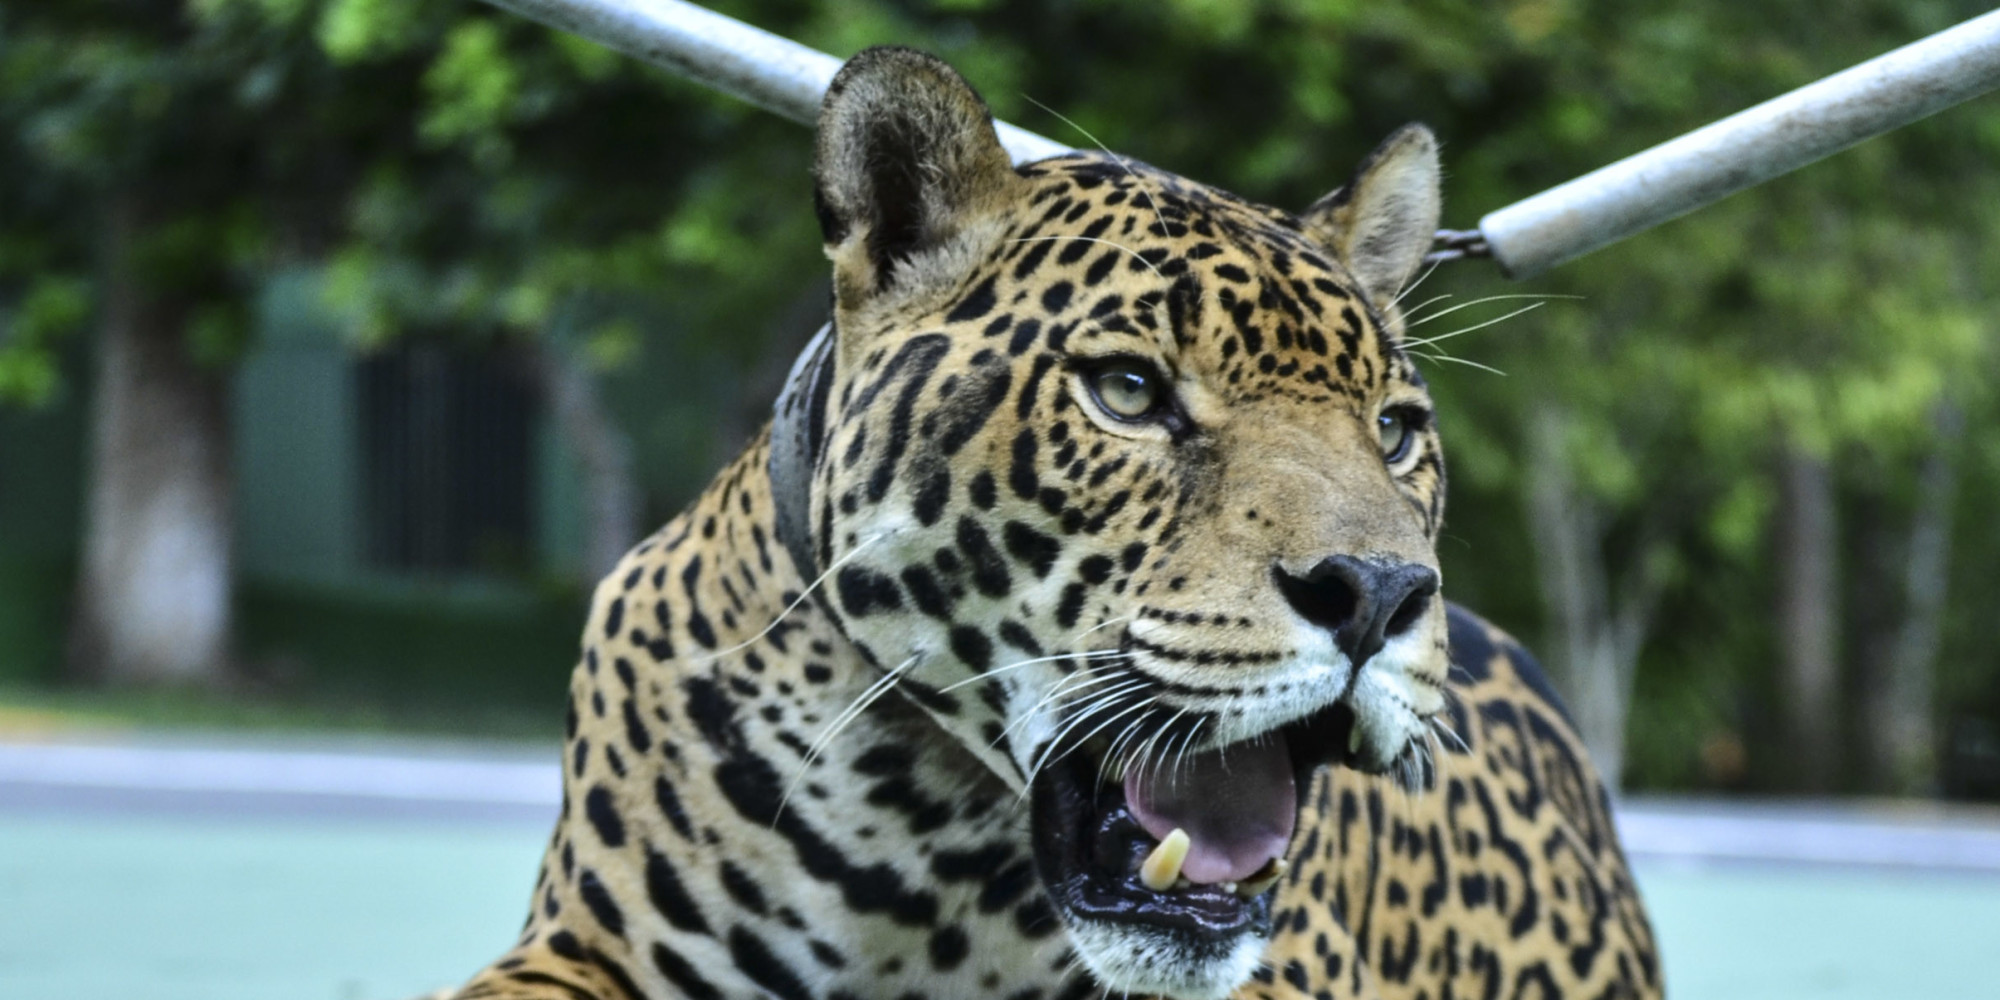 Why Should A Jaguar Be Displayed As A Mascot To Begin With? | HuffPost